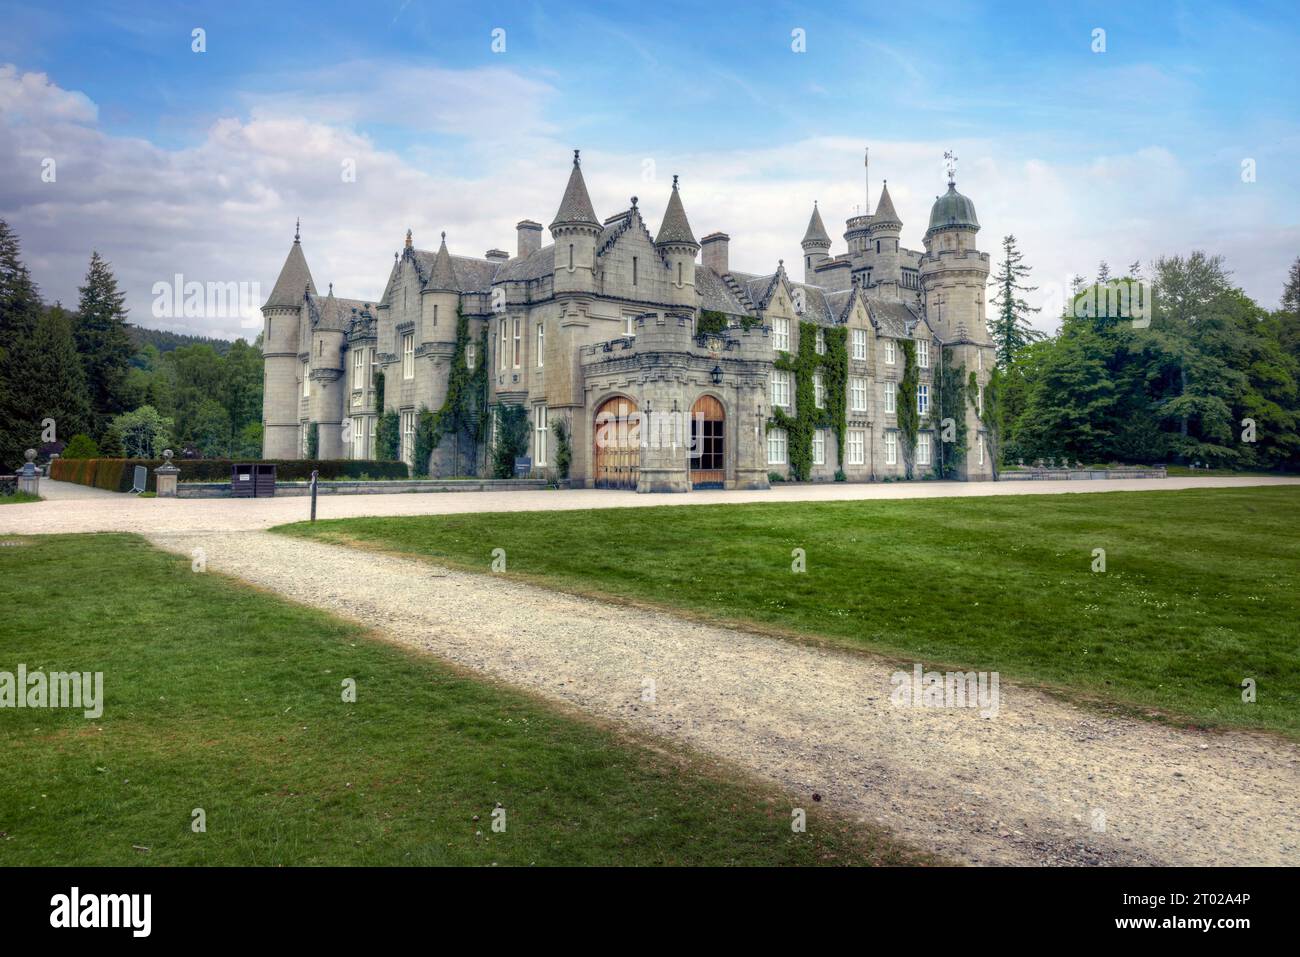 The summer residence of the British Royal Family is Balmoral Castle in Aberdeenshire, Scotland Stock Photo